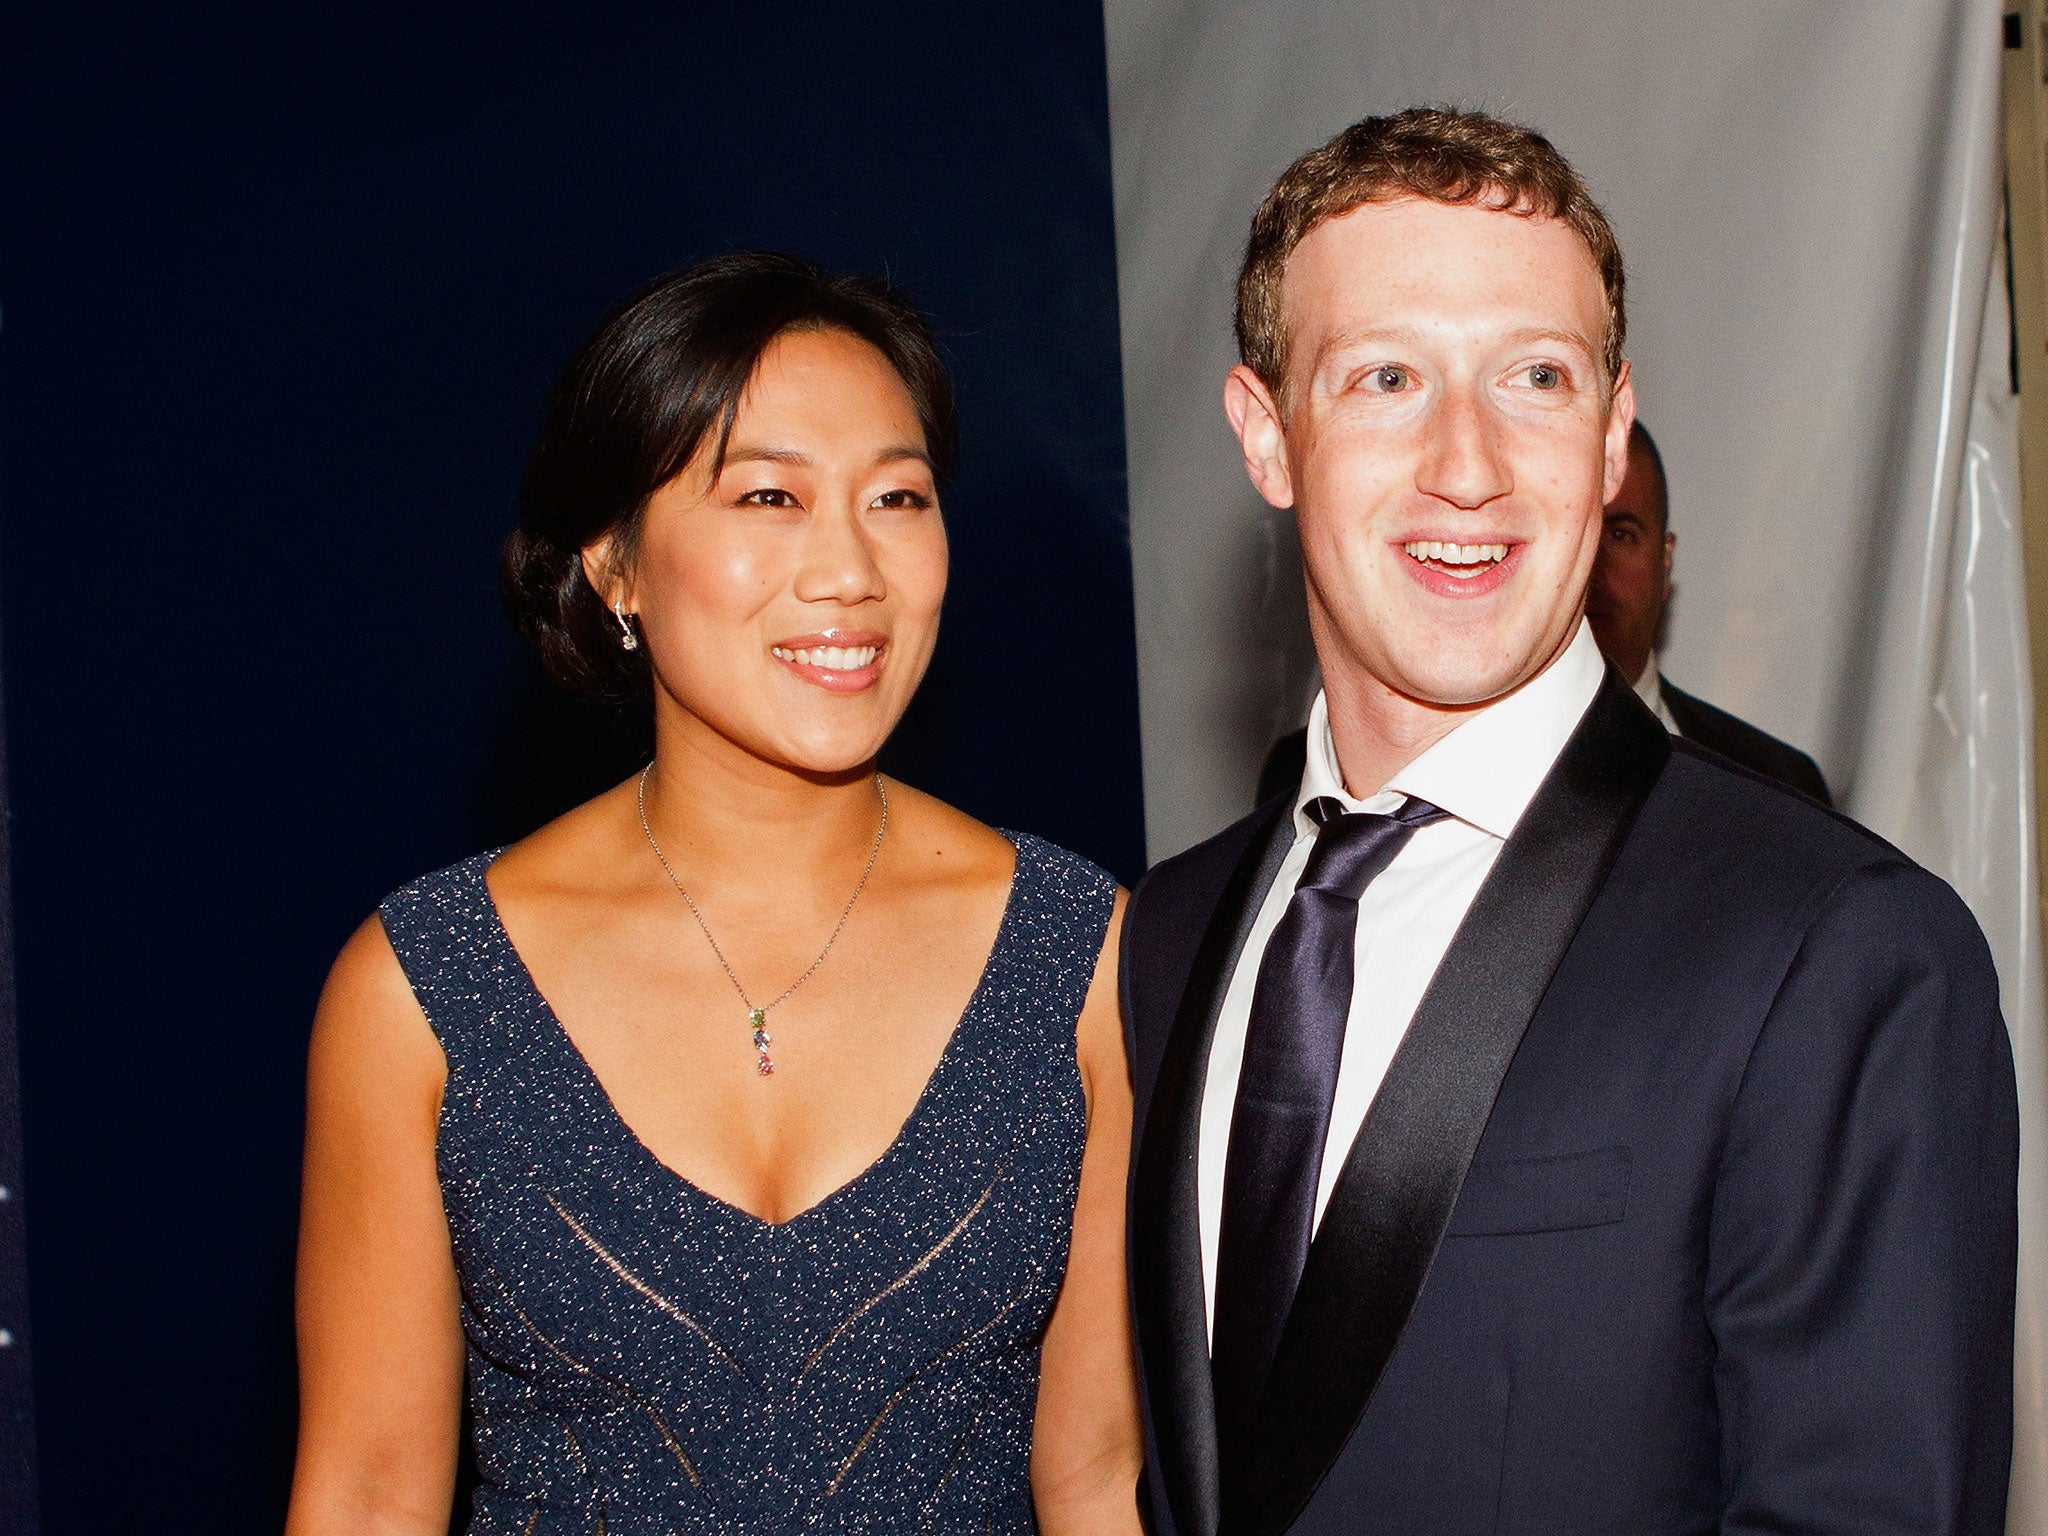 China S President Xi Jinping Turns Down Mark Zuckerberg S Request To Name His Unborn Child At White House Dinner The Independent The Independent